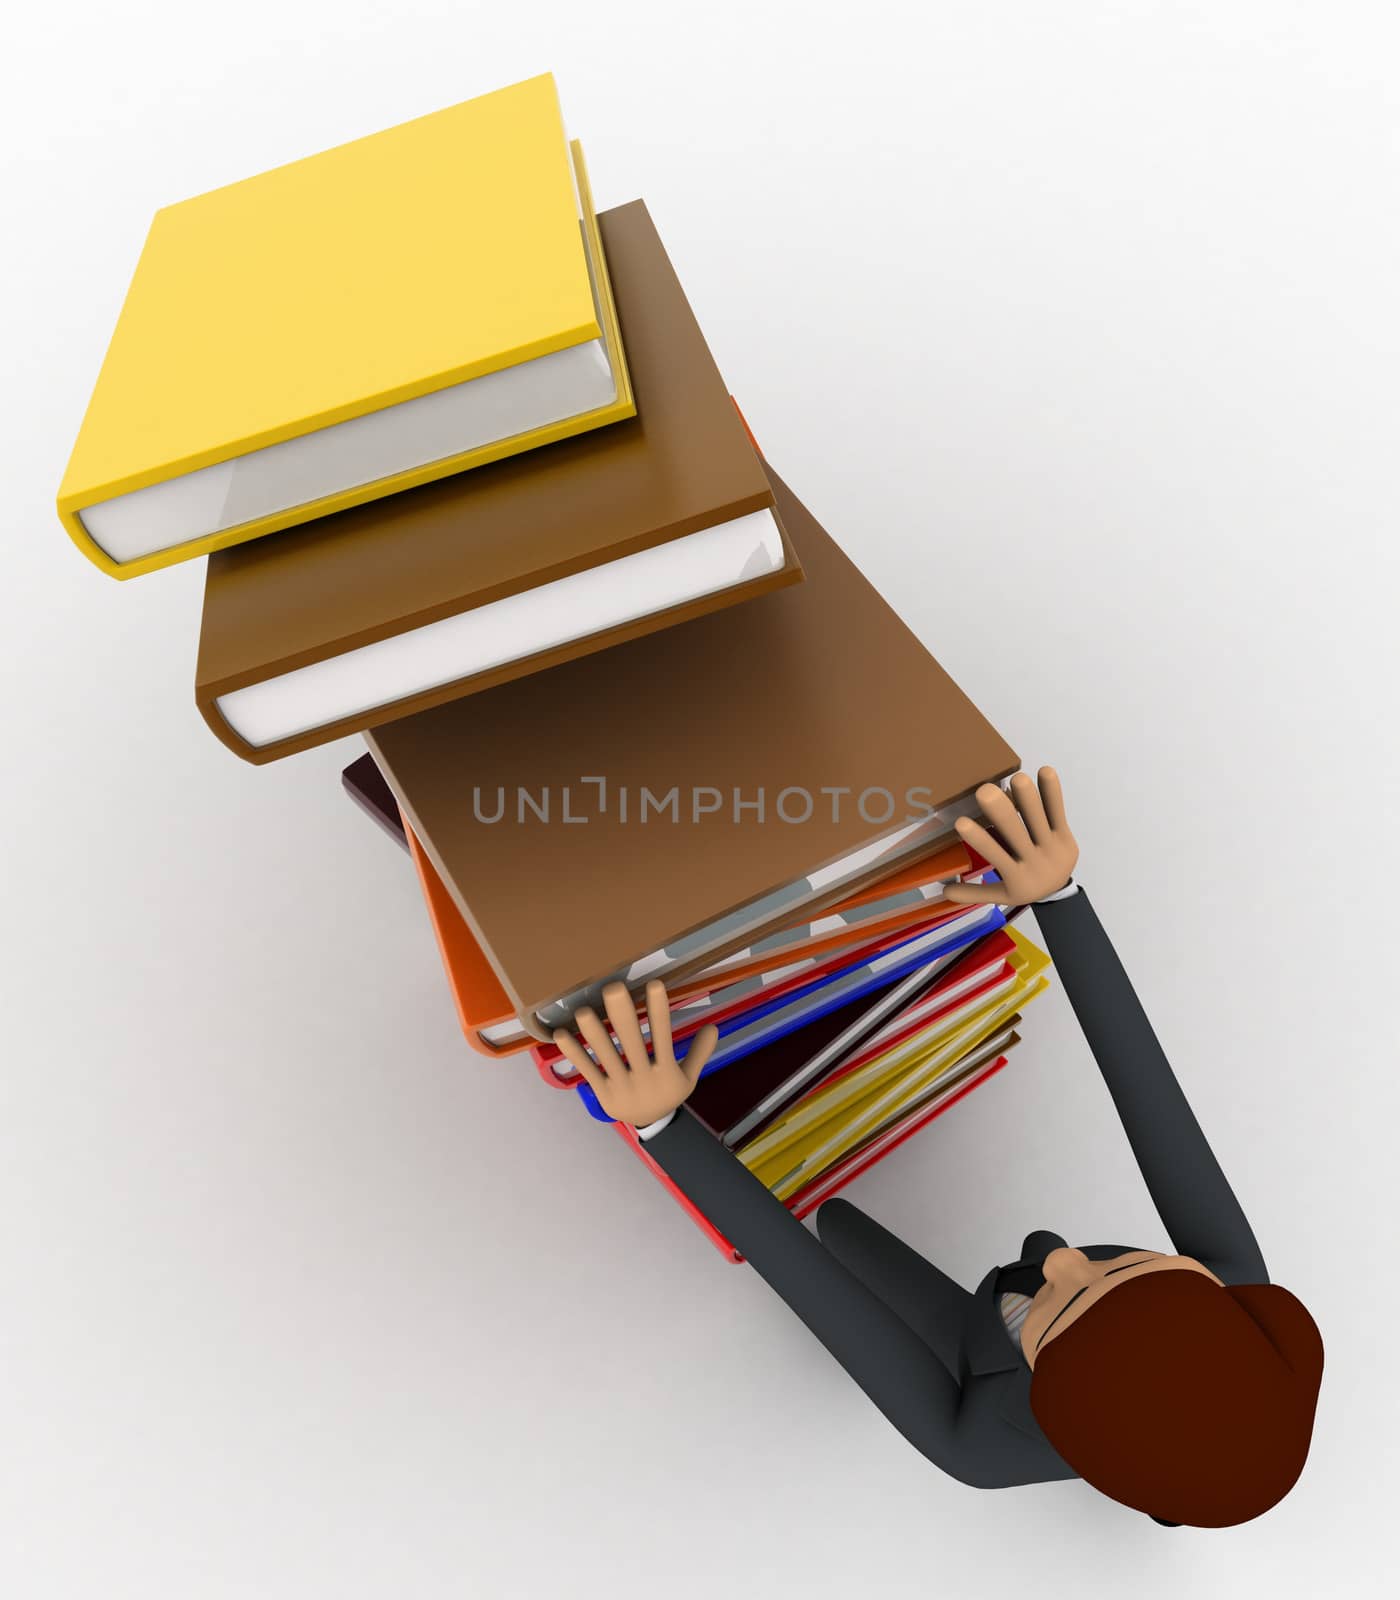 3d man pushing pile of books and books are falling concept by touchmenithin@gmail.com